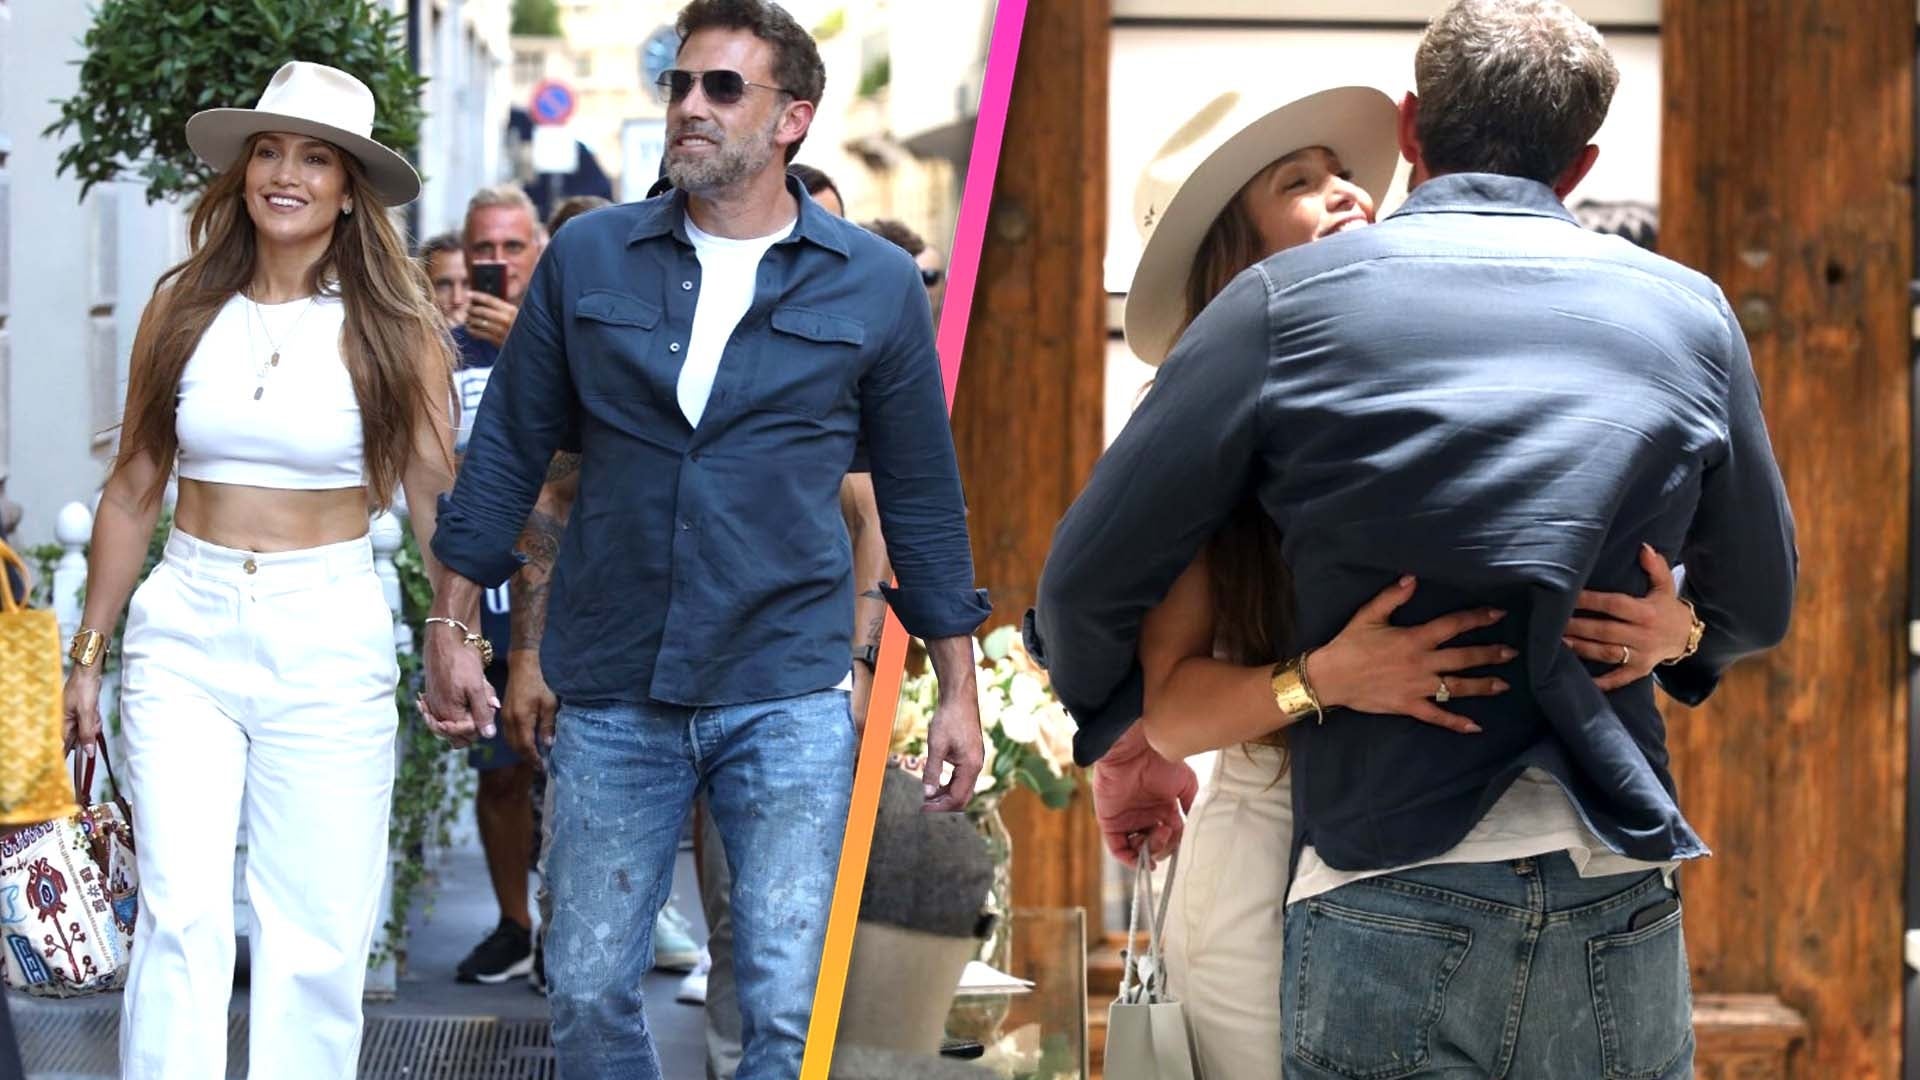 Jennifer Lopez Gets Handsy With Ben Affleck During Honeymoon In Italy 